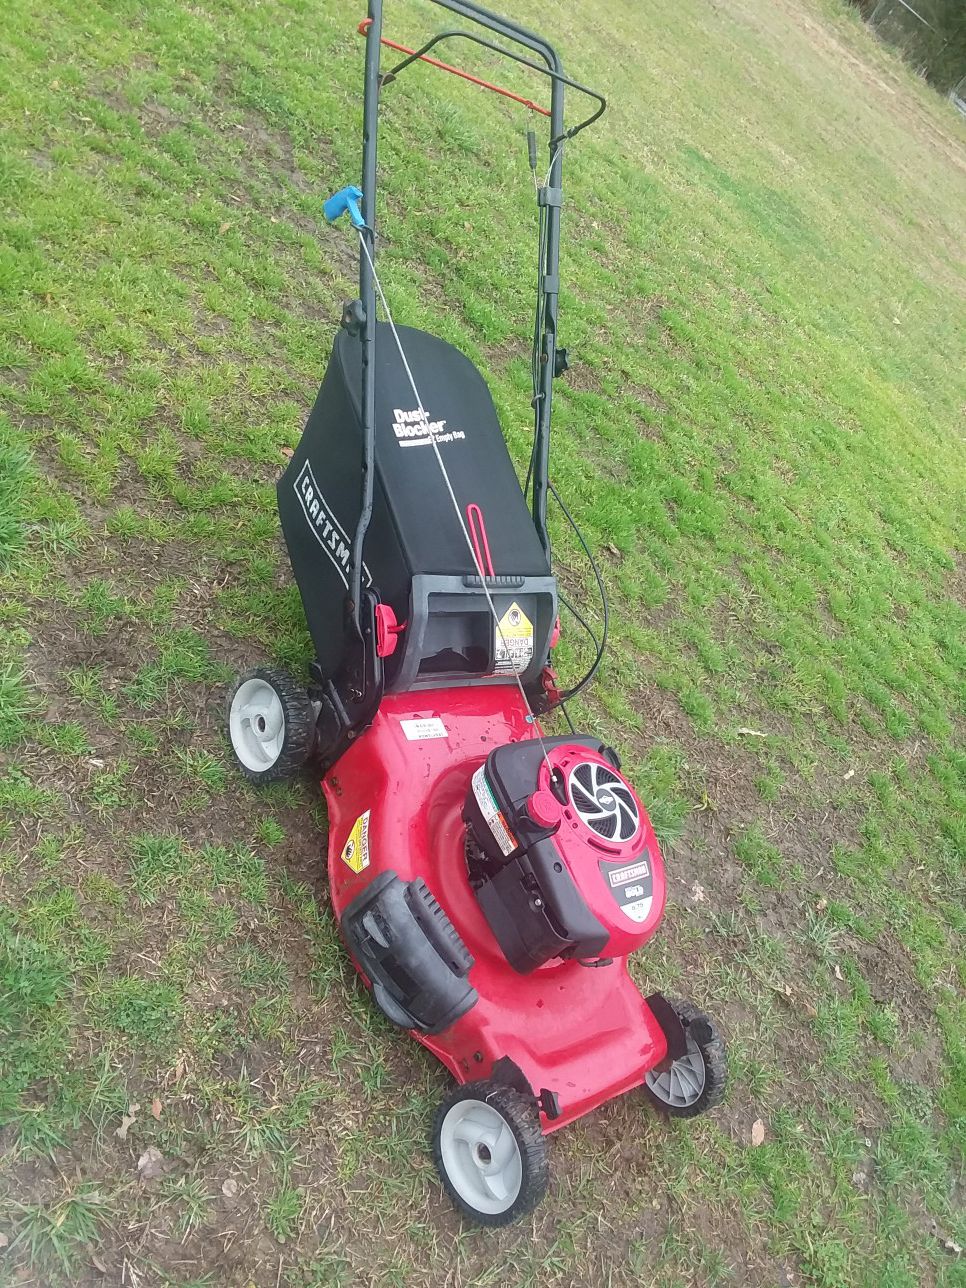 Craftsman selfpropelled mower! With bagger, runs an works great! $180 obo..